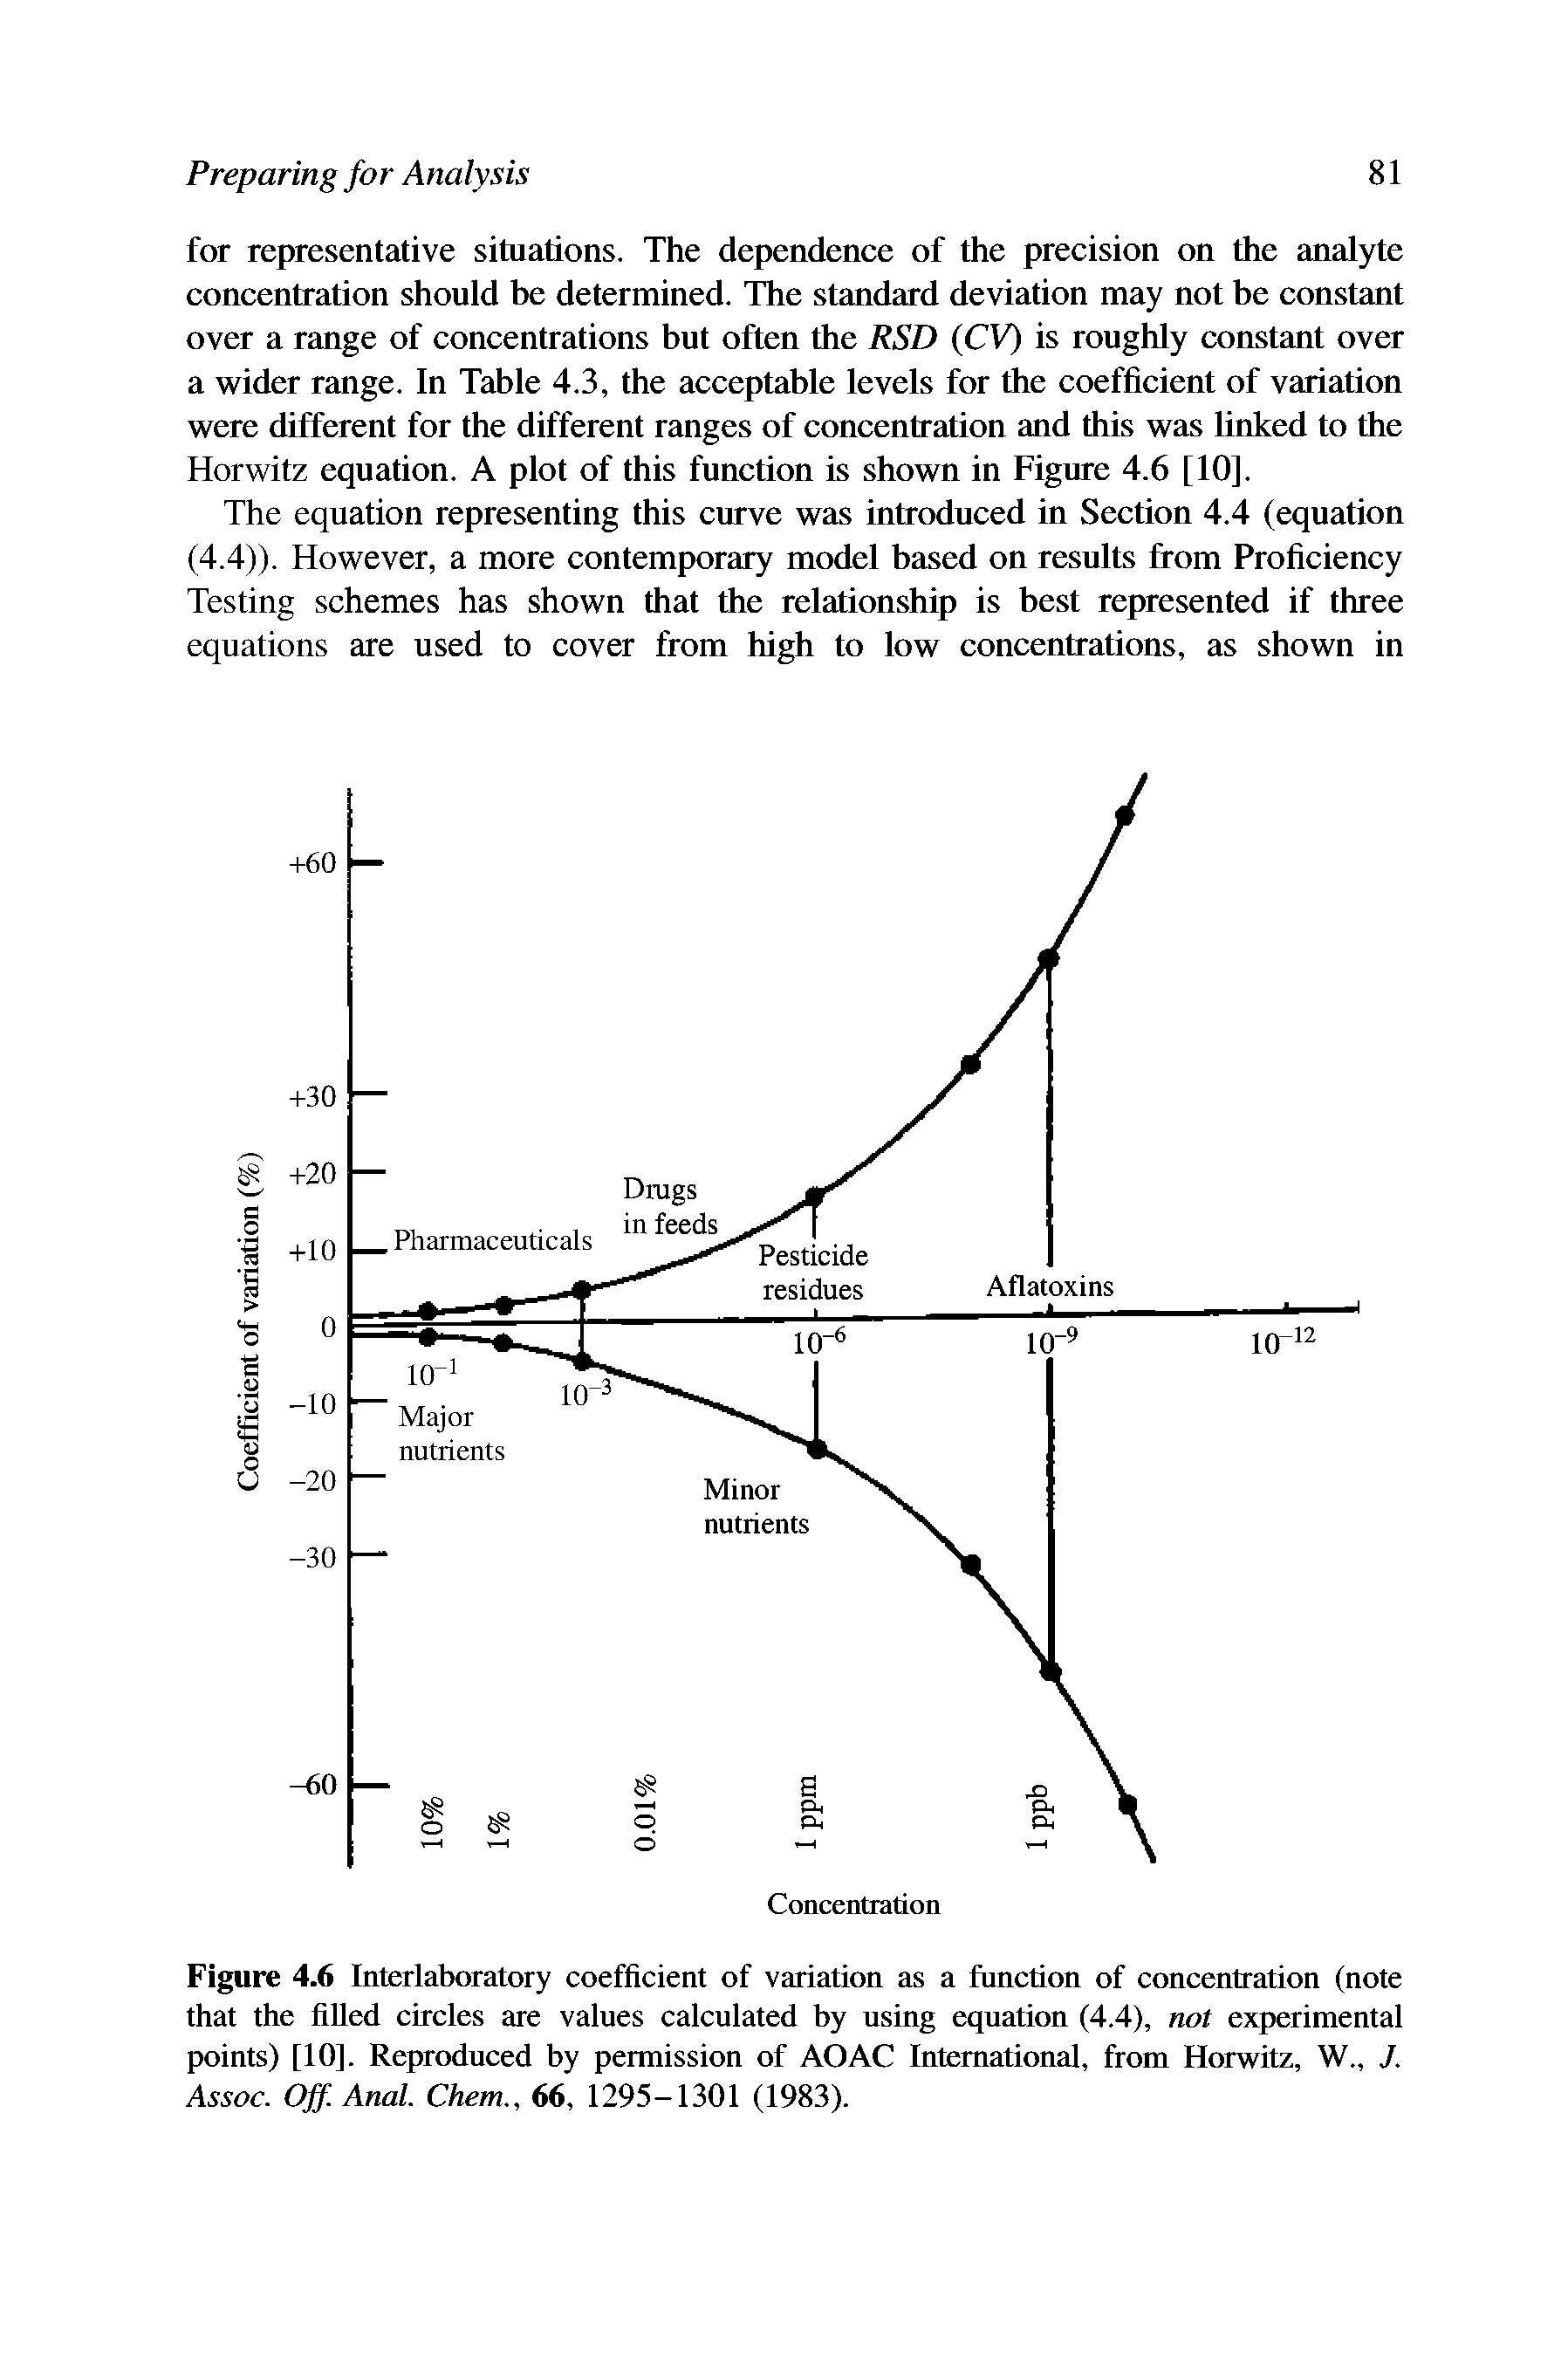 Figure 4.6 Interlaboratory coefficient of variation as a function of concentration (note that the filled circles are values calculated by using equation (4.4), not experimental points) [10]. Reproduced by permission of AOAC International, from Horwitz, W., J. Assoc. Off. Anal. Chem., 66, 1295-1301 (1983).